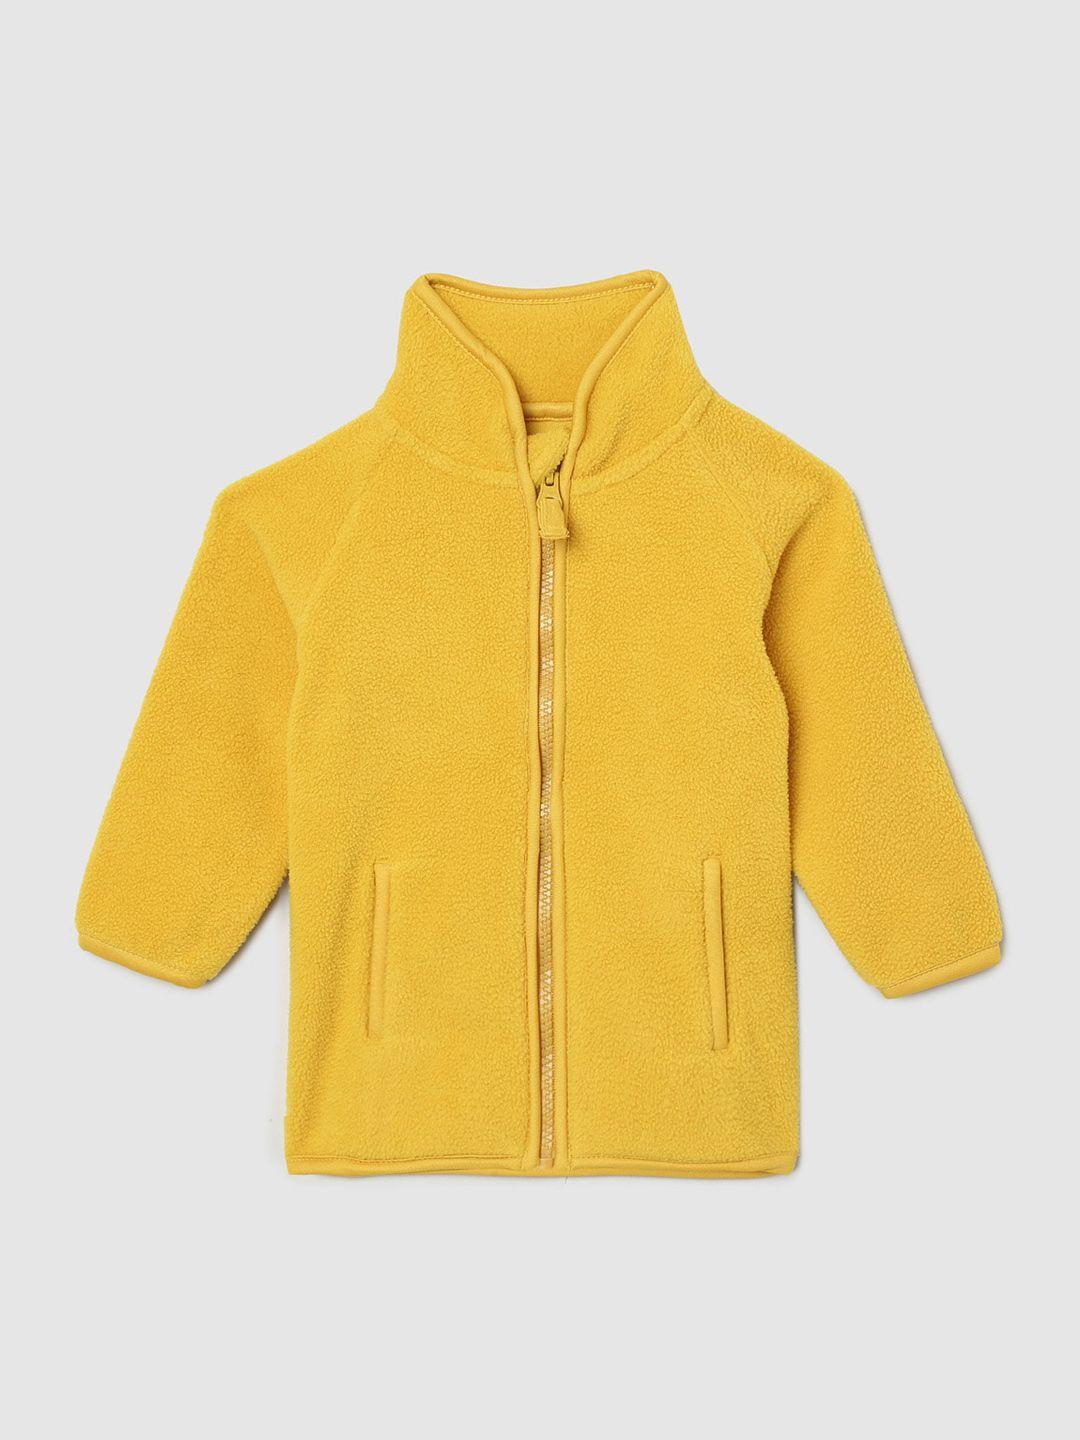 max-boys-yellow-solid-sweater